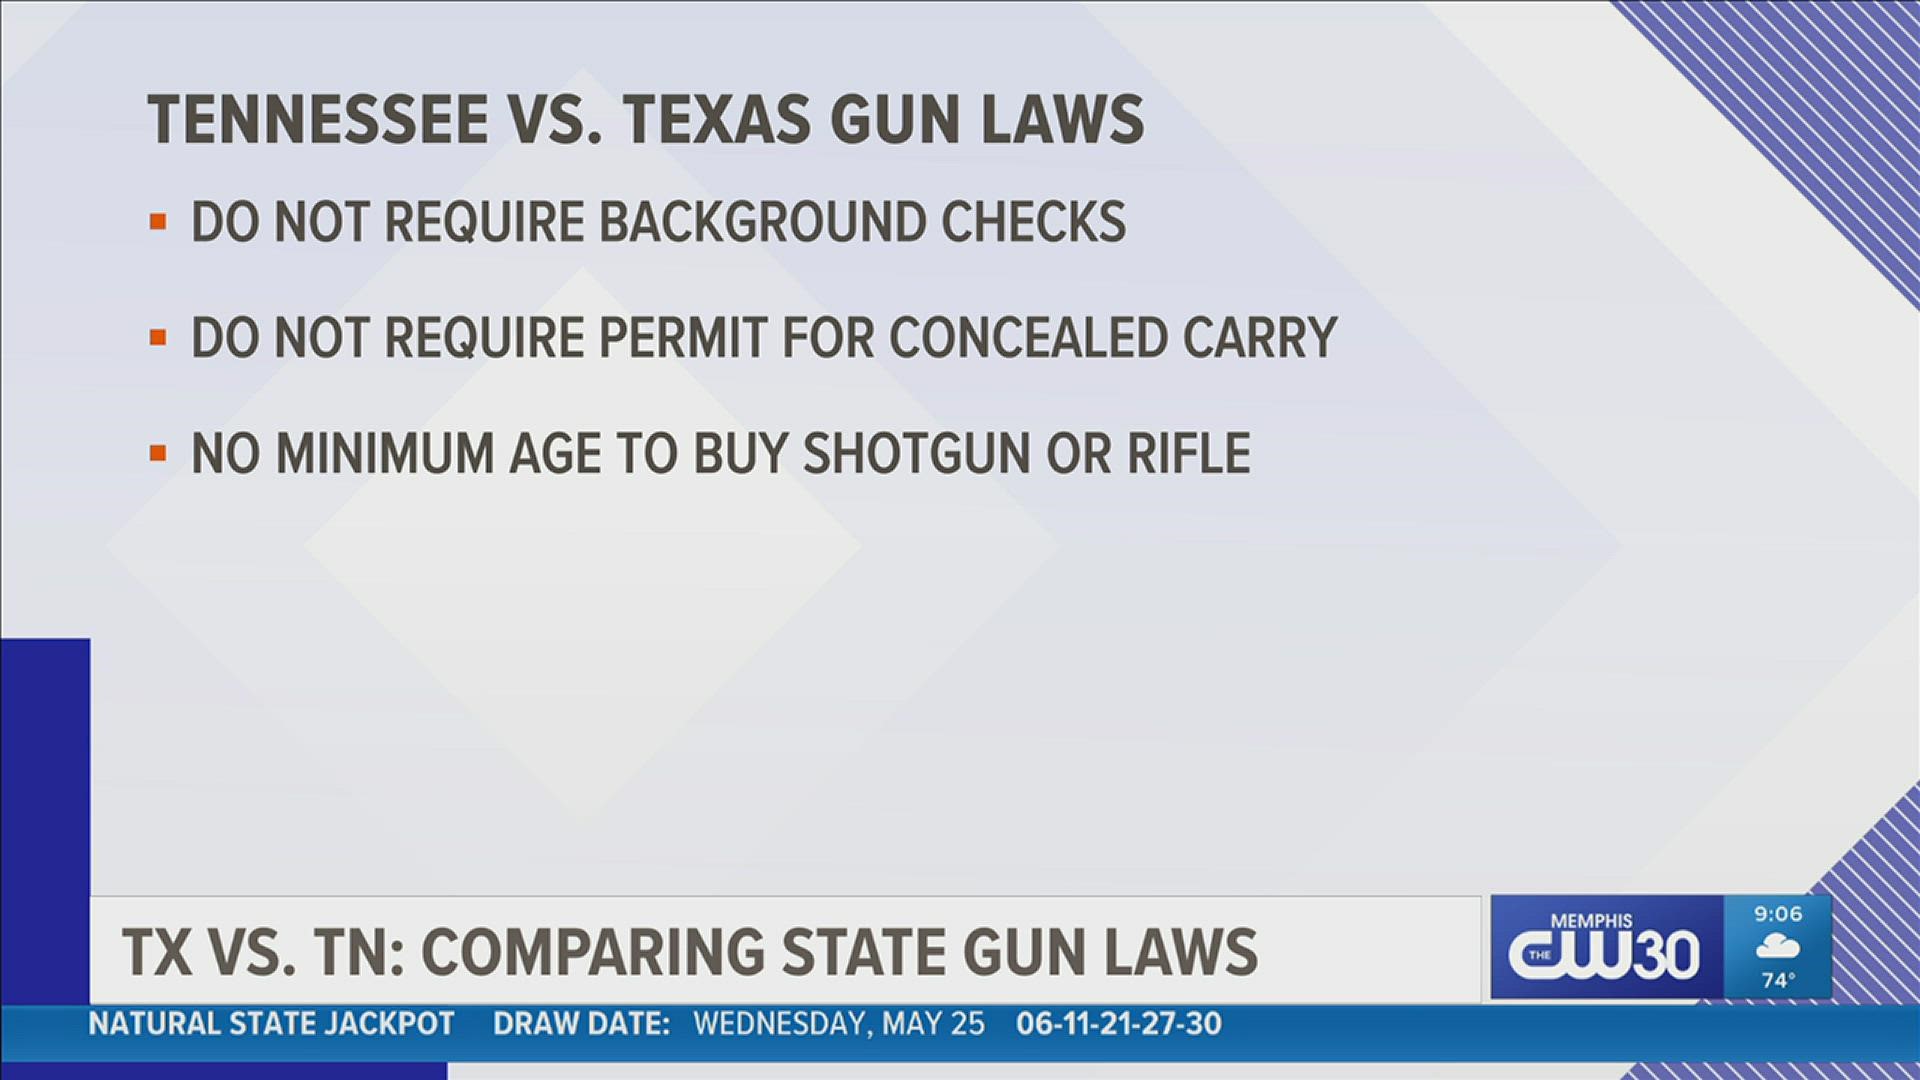 The massacre in Texas is drawing attention to the nation's gun laws, which vary widely from state to state.